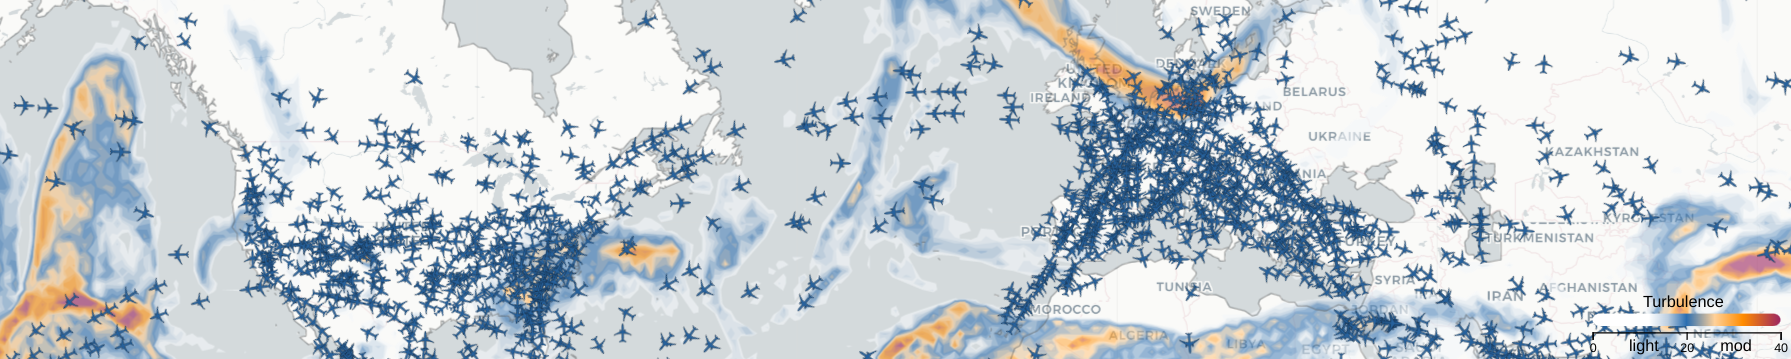 live flight tracking map with turbulence overlay